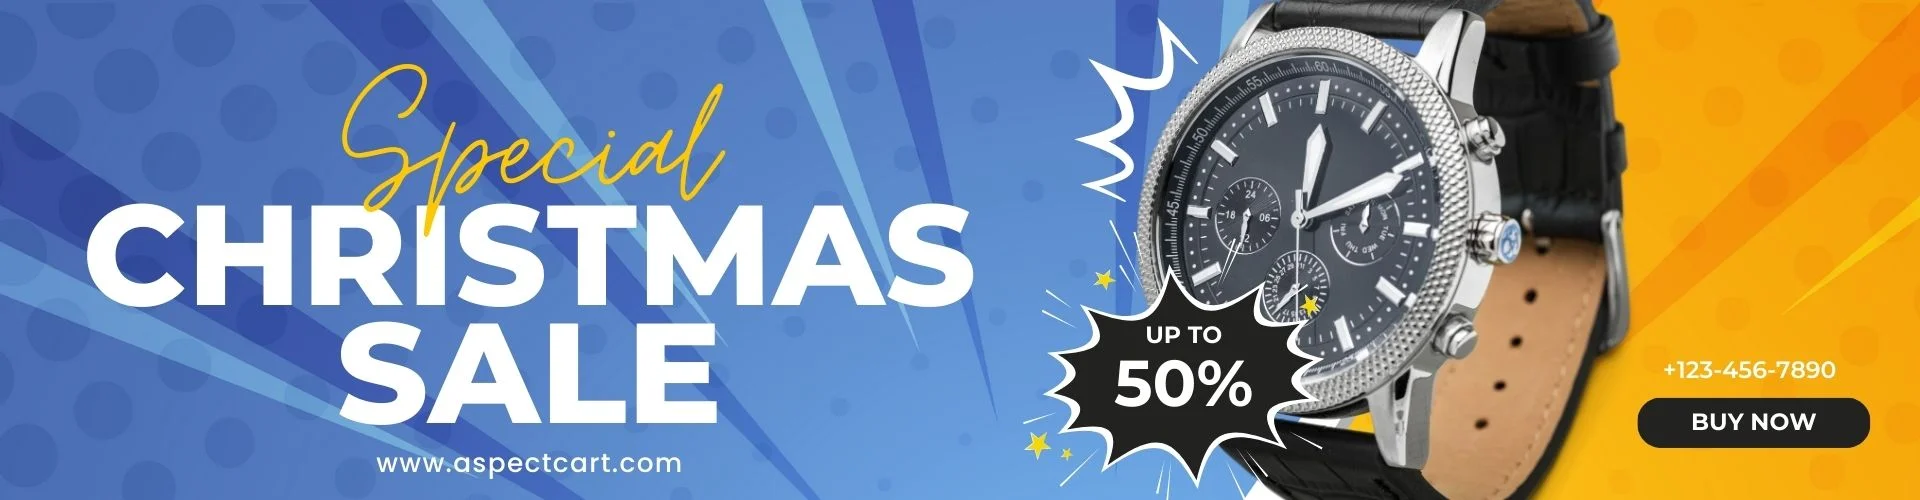 Special Christmas Sale Banner at an Online Watch Store